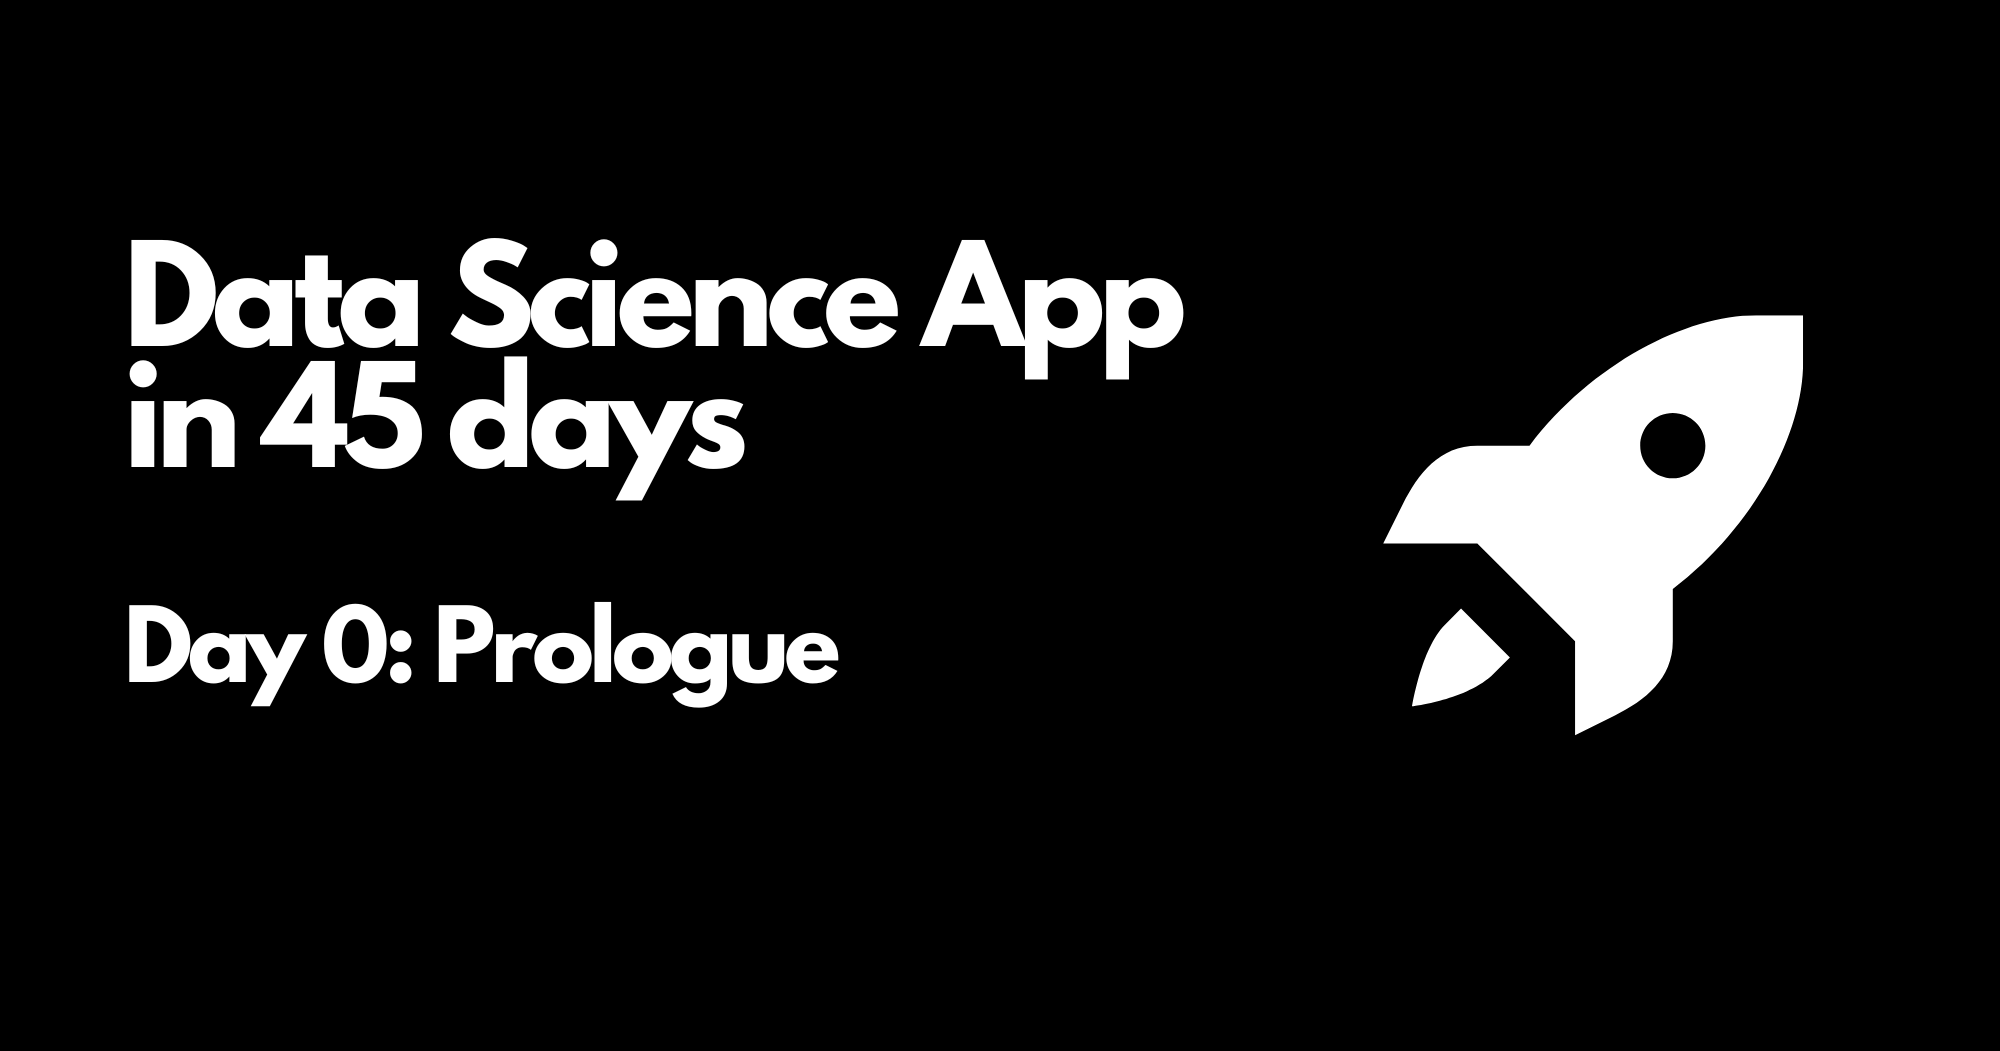 Day 0 - Data Science App in 45 days - Prologue